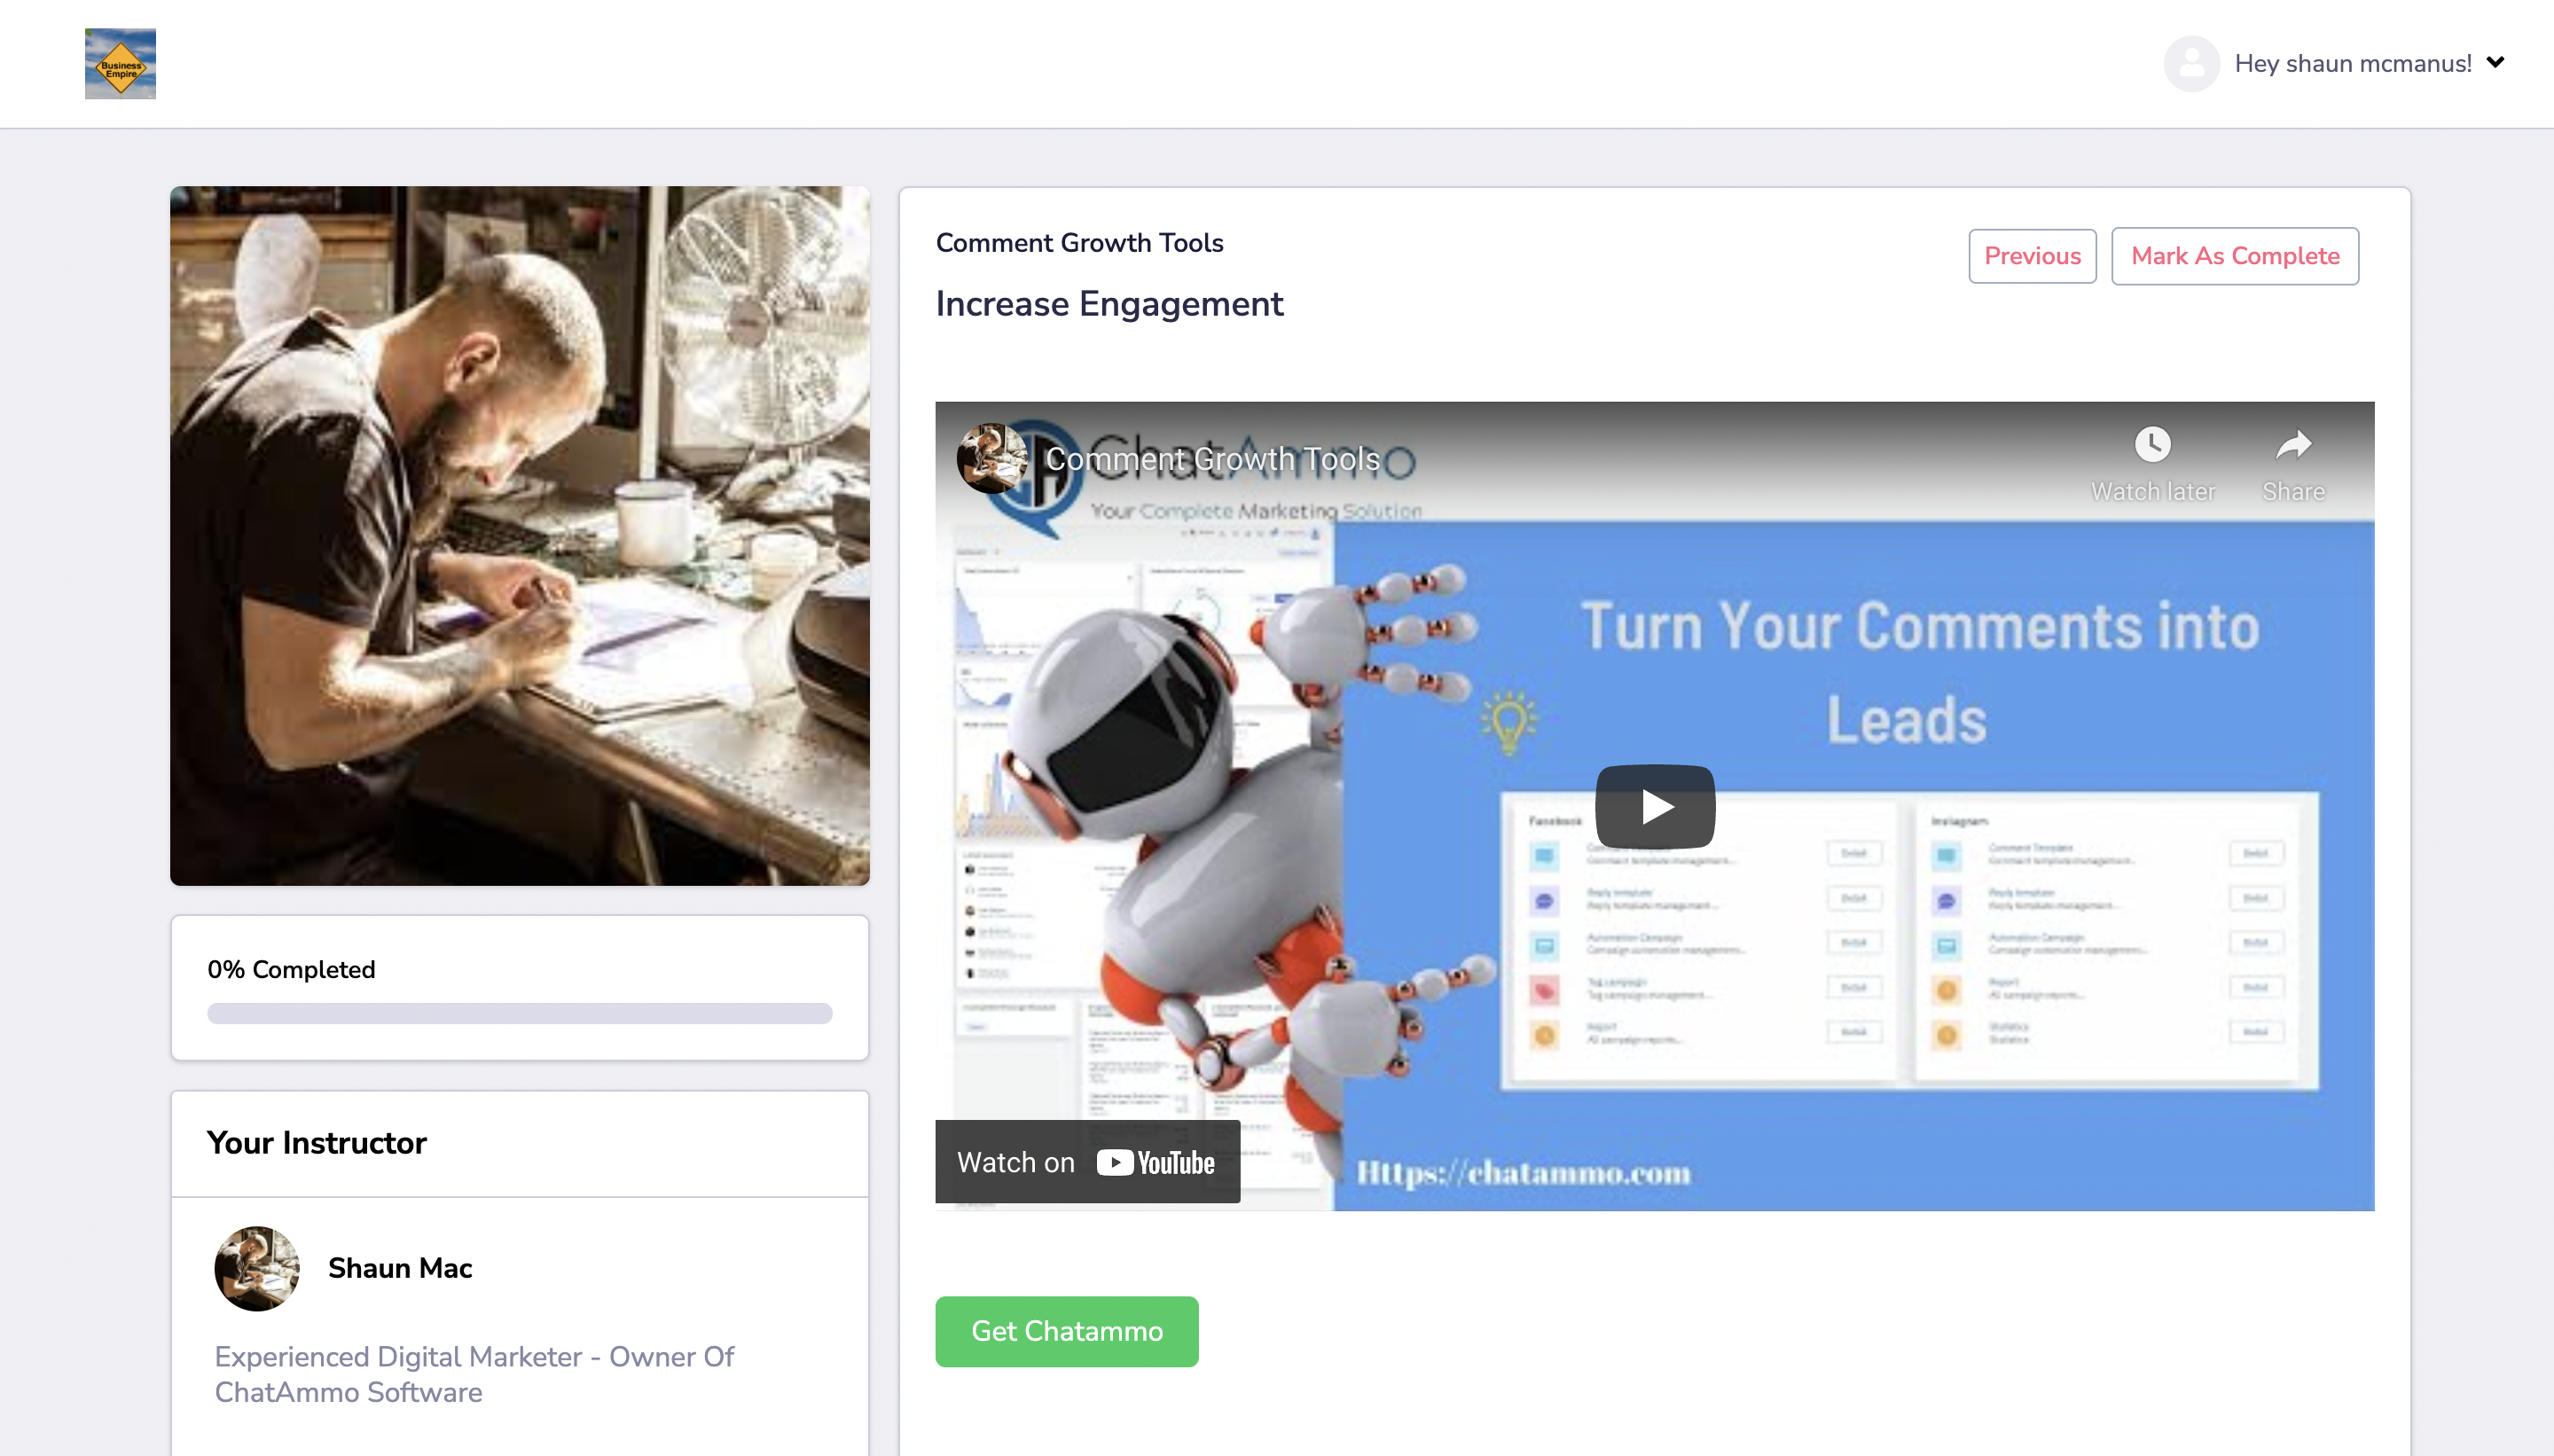 Increase your engagement to leads